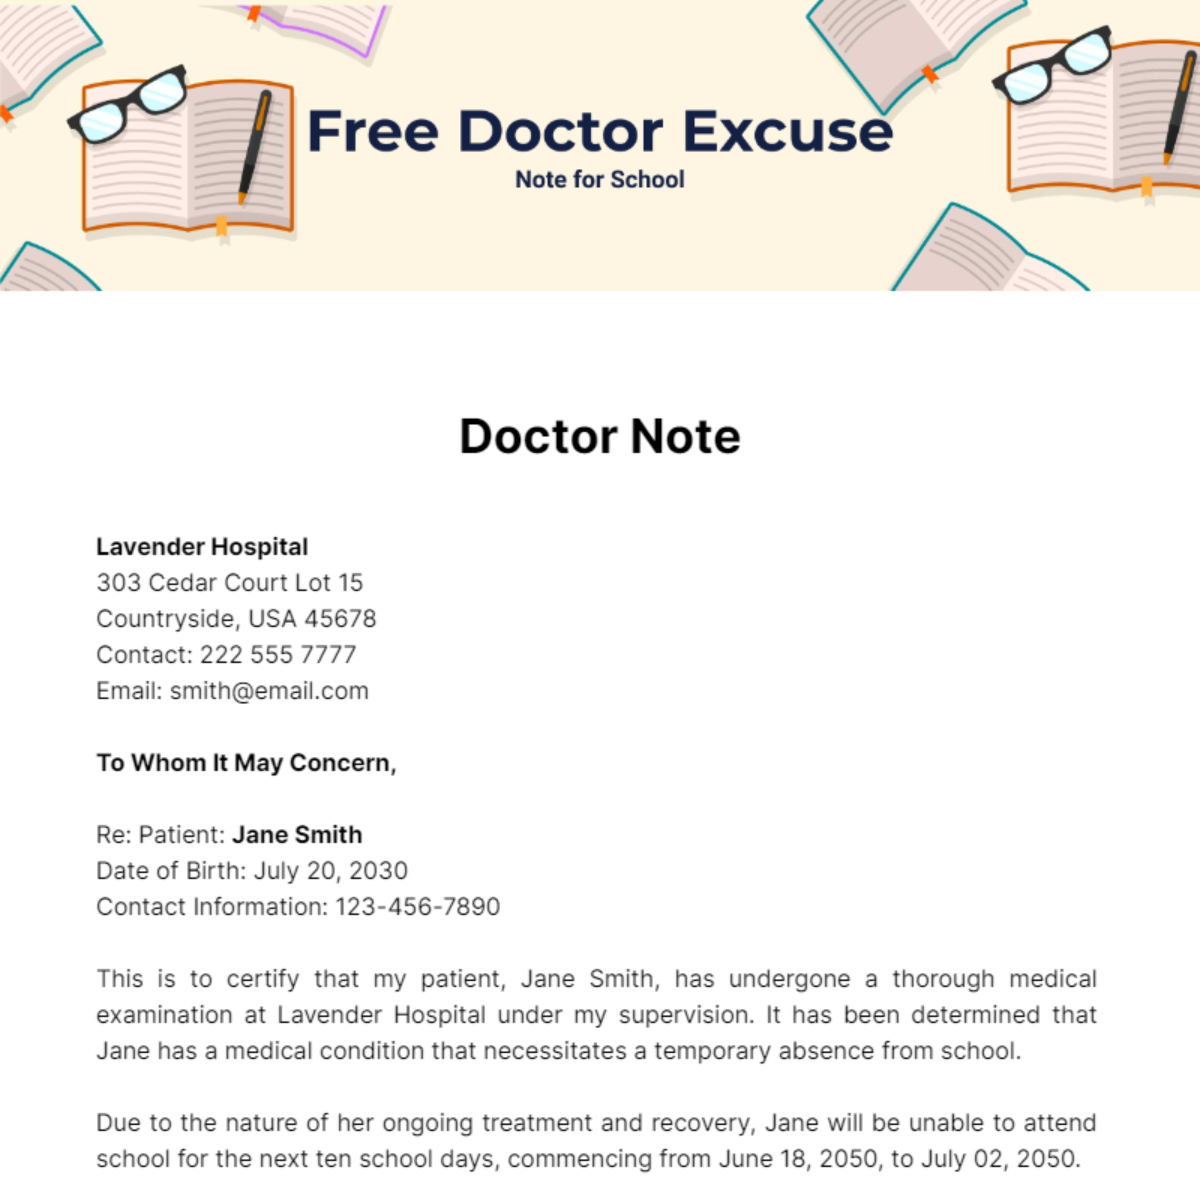 Doctor Excuse Note For School Template